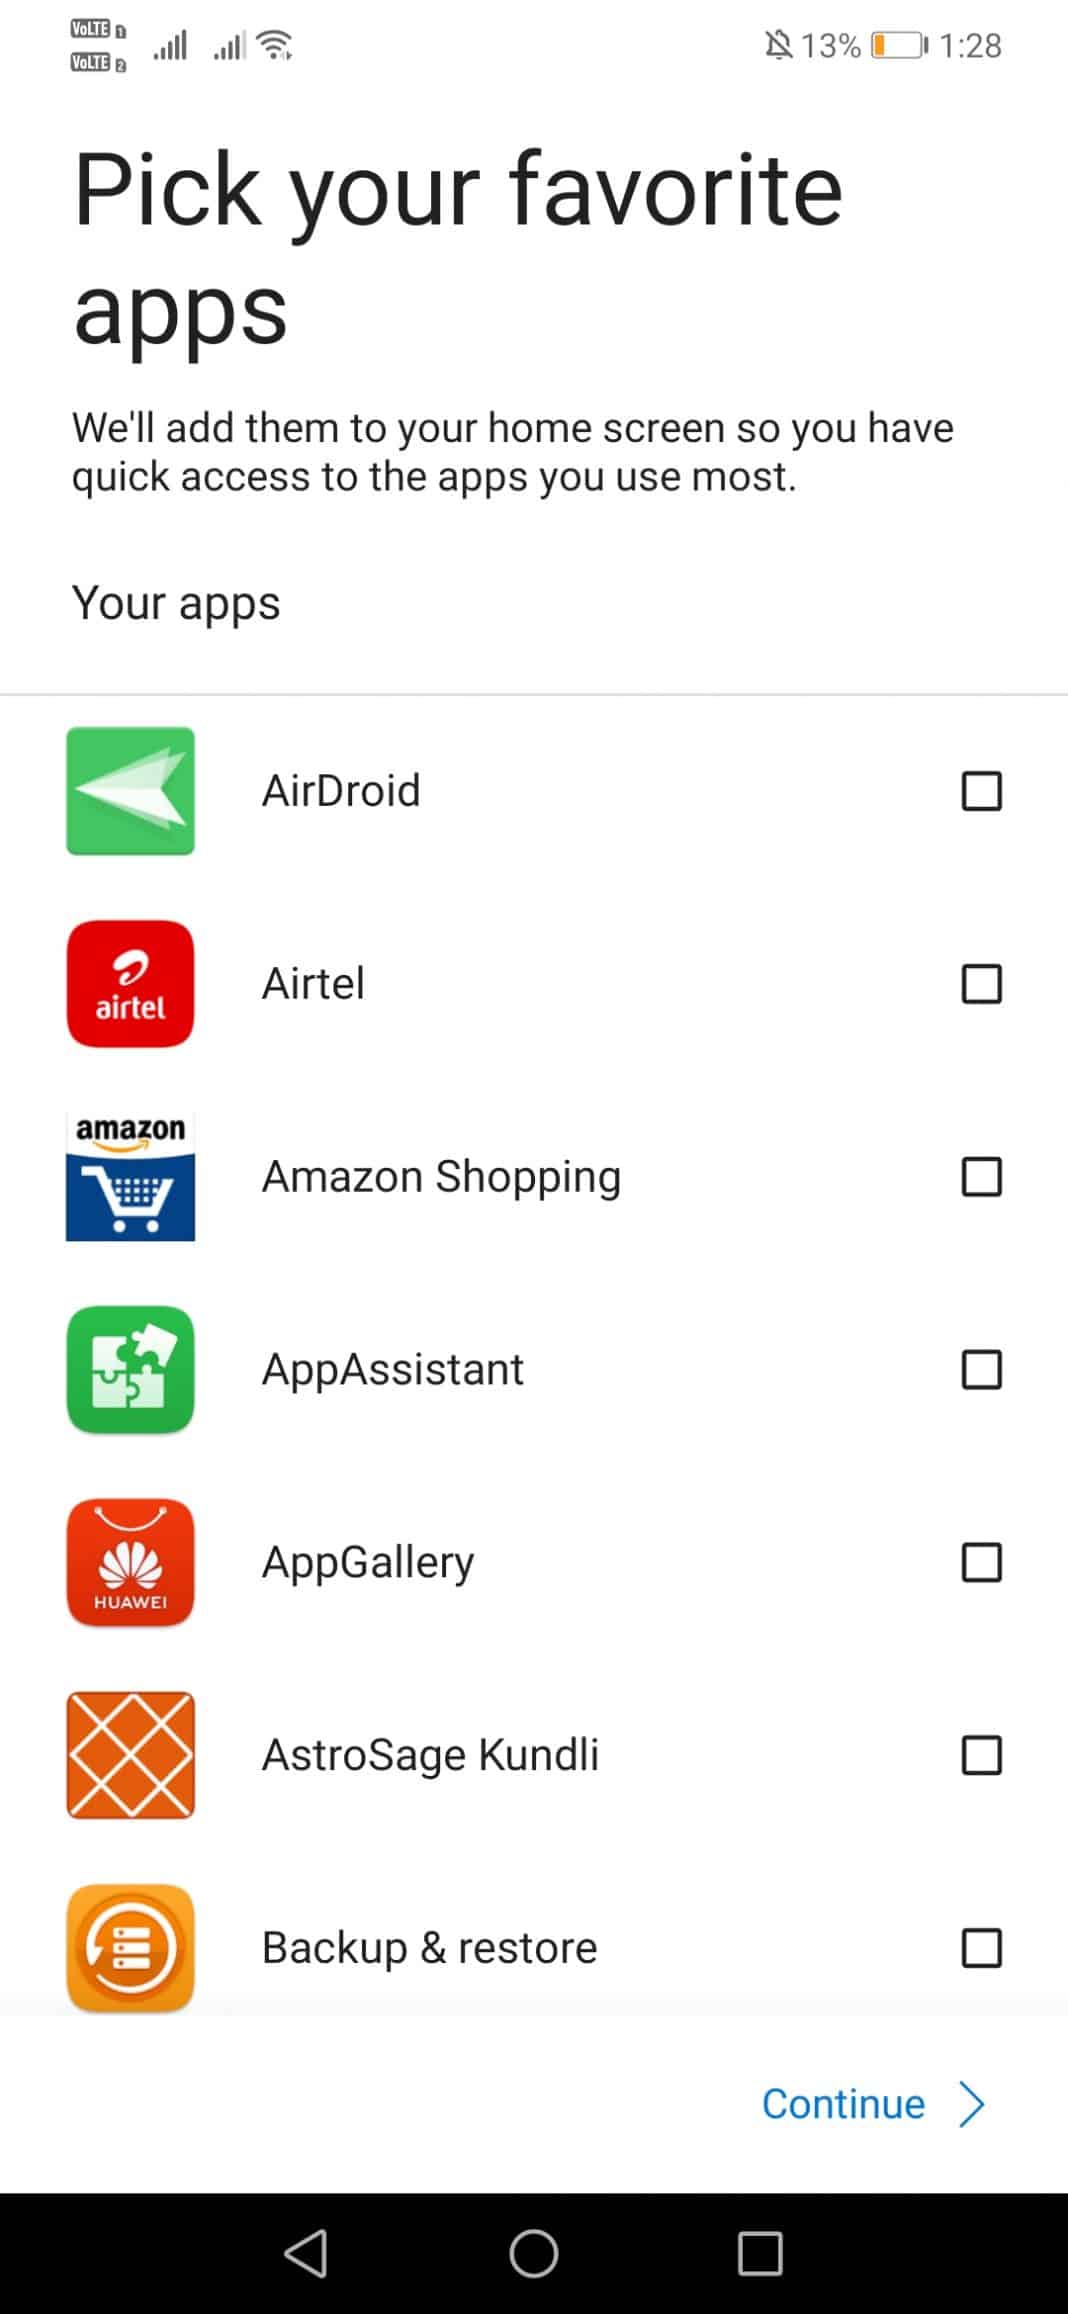 Pick your favorite apps